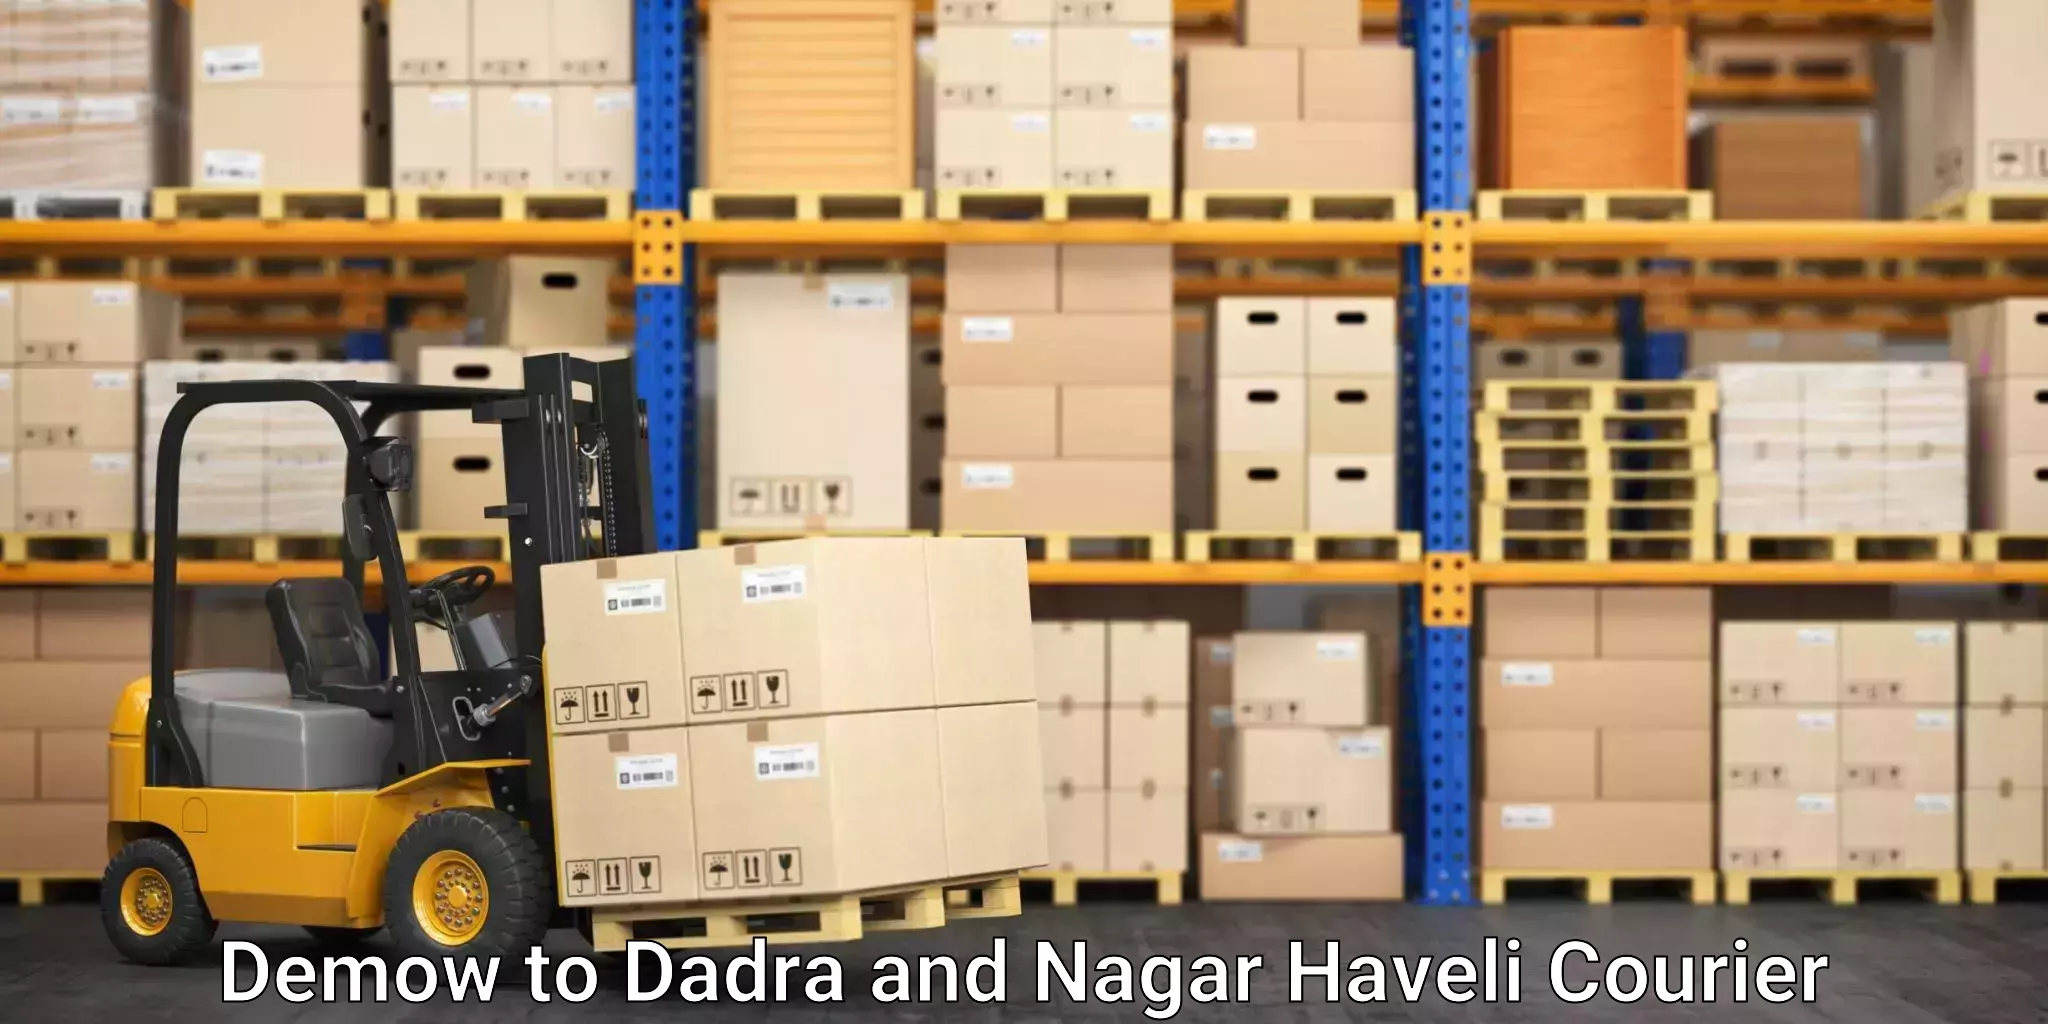 Next-day delivery options in Demow to Dadra and Nagar Haveli